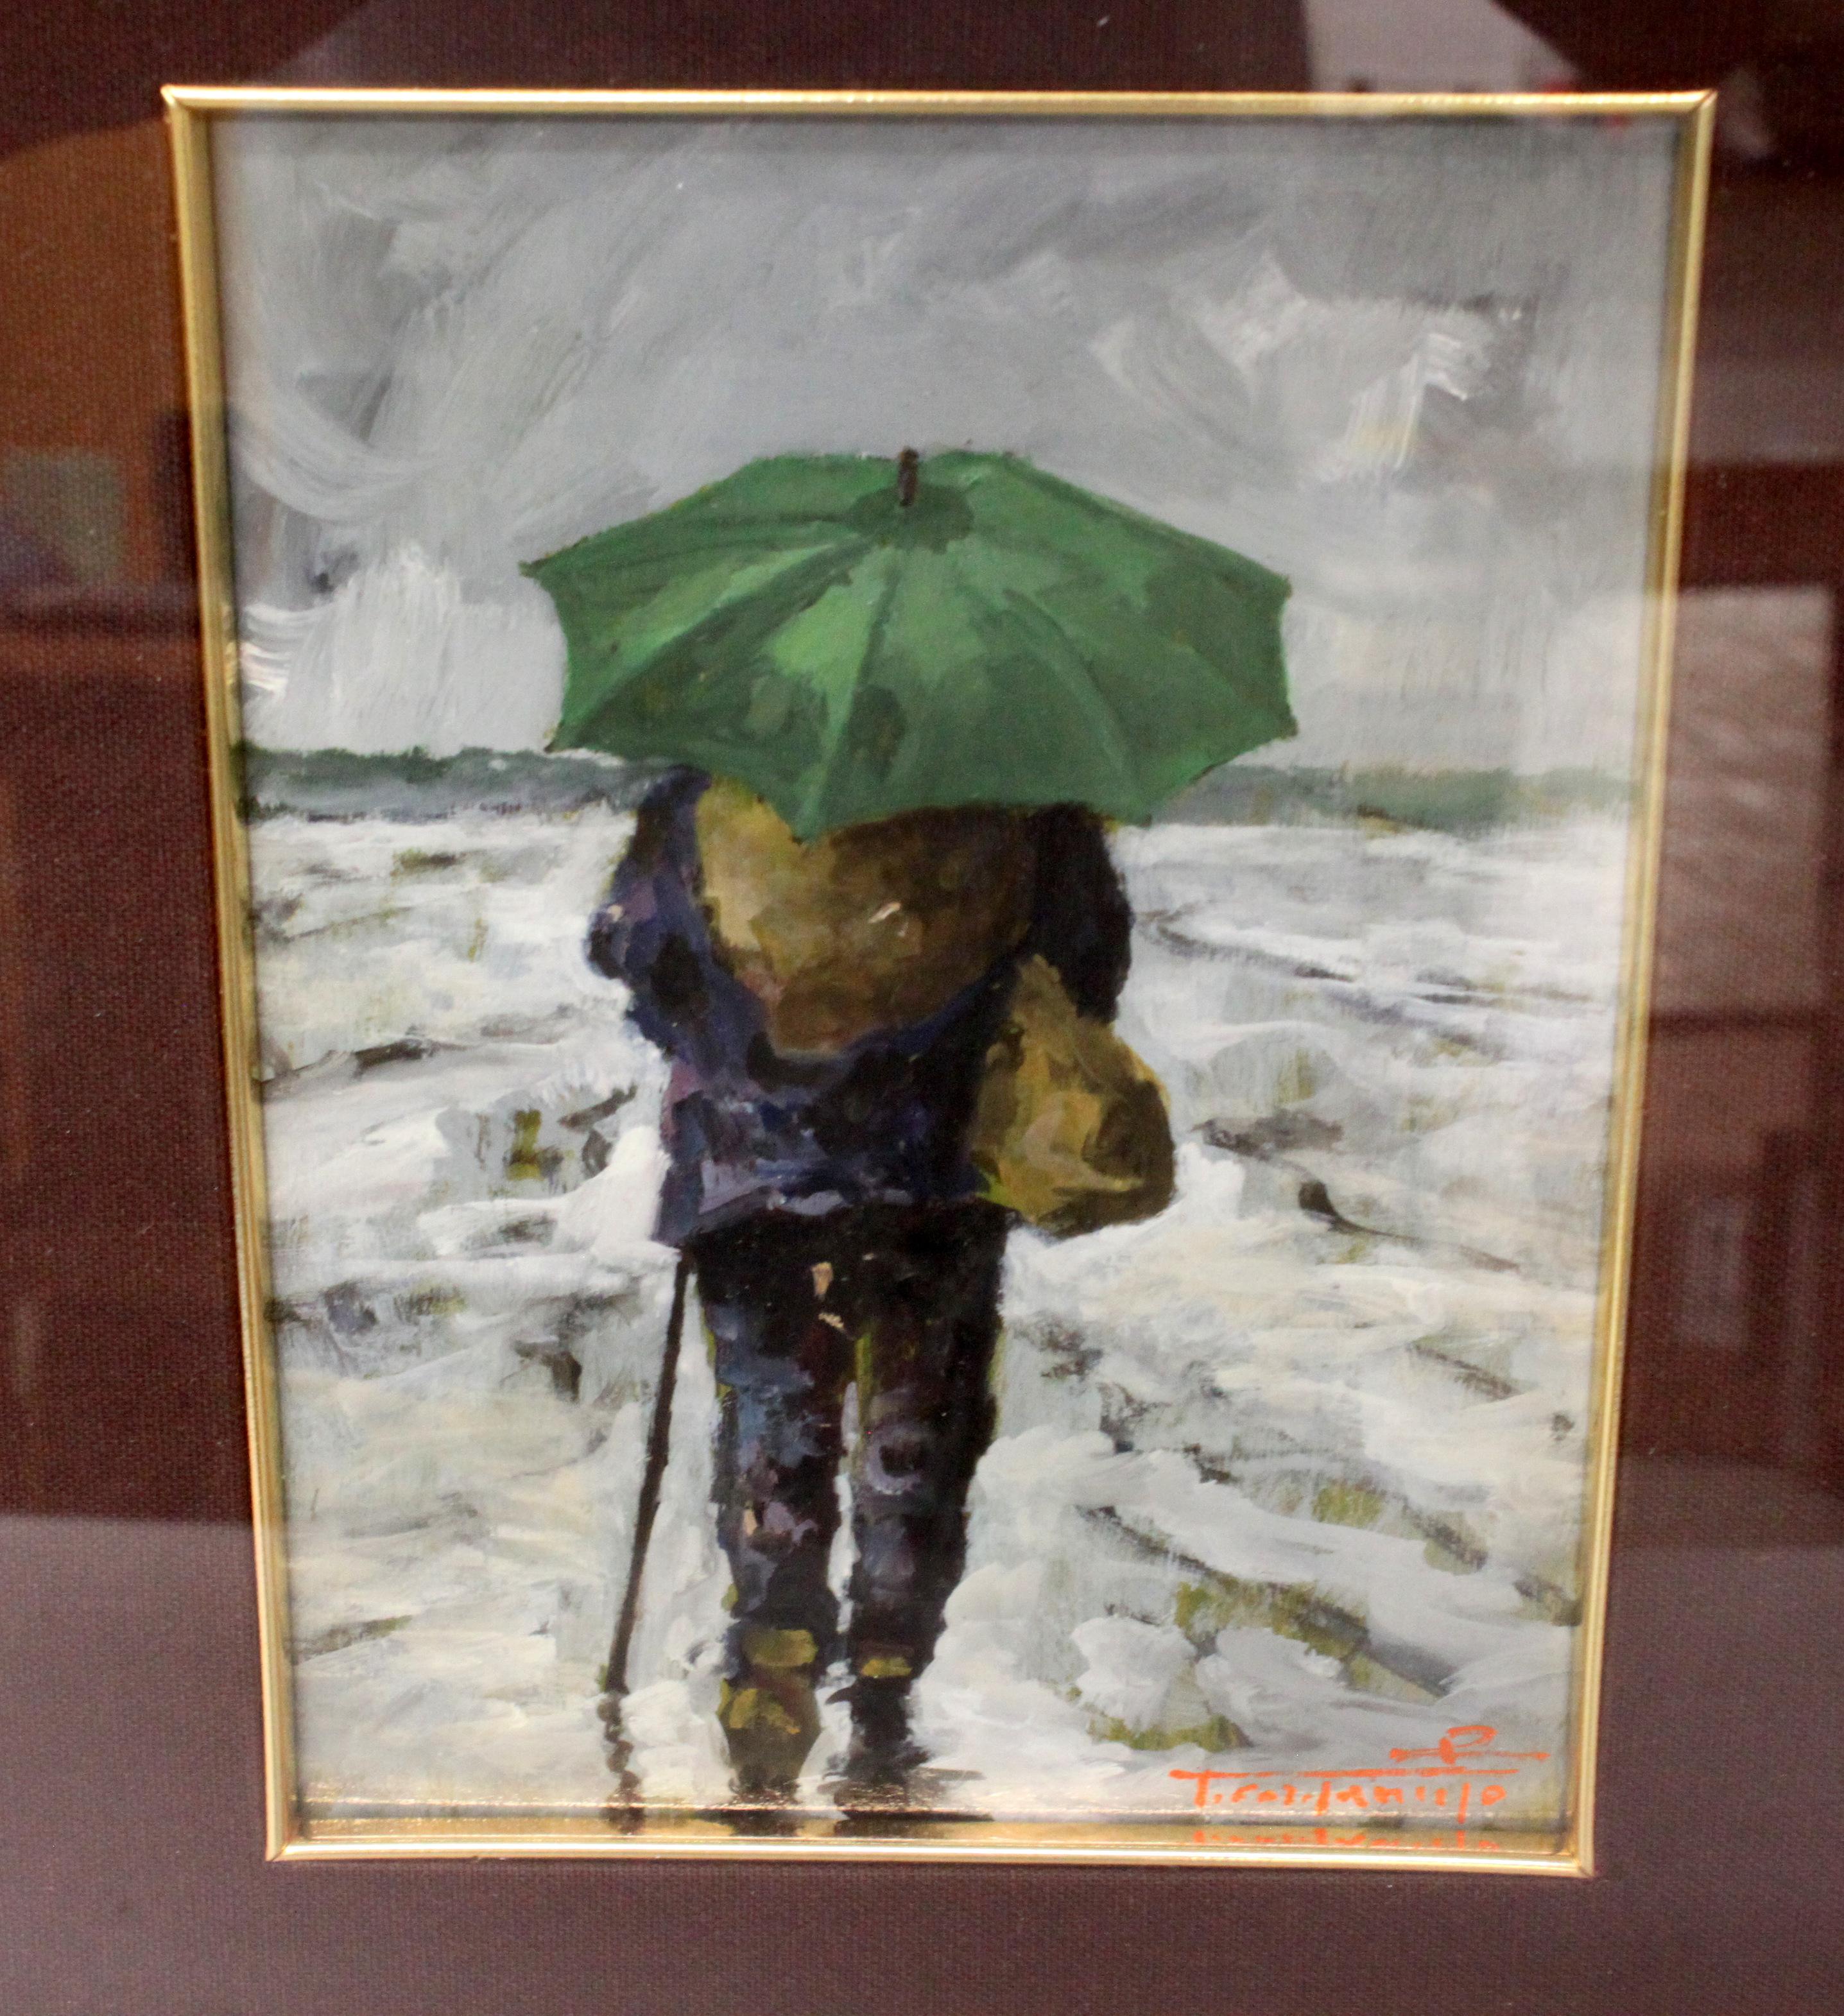 Title: Man with umbrella
Artist: Unidentified 
Medium: Oil on hardboard
Signed, 
circa 1956

Dimensions:
Image size 23×17 cm
Total dimensions 42.5 × 36.5 × 4.3 cm

Approximate weight: 2 kg

Condition: Has signs of general usage with some